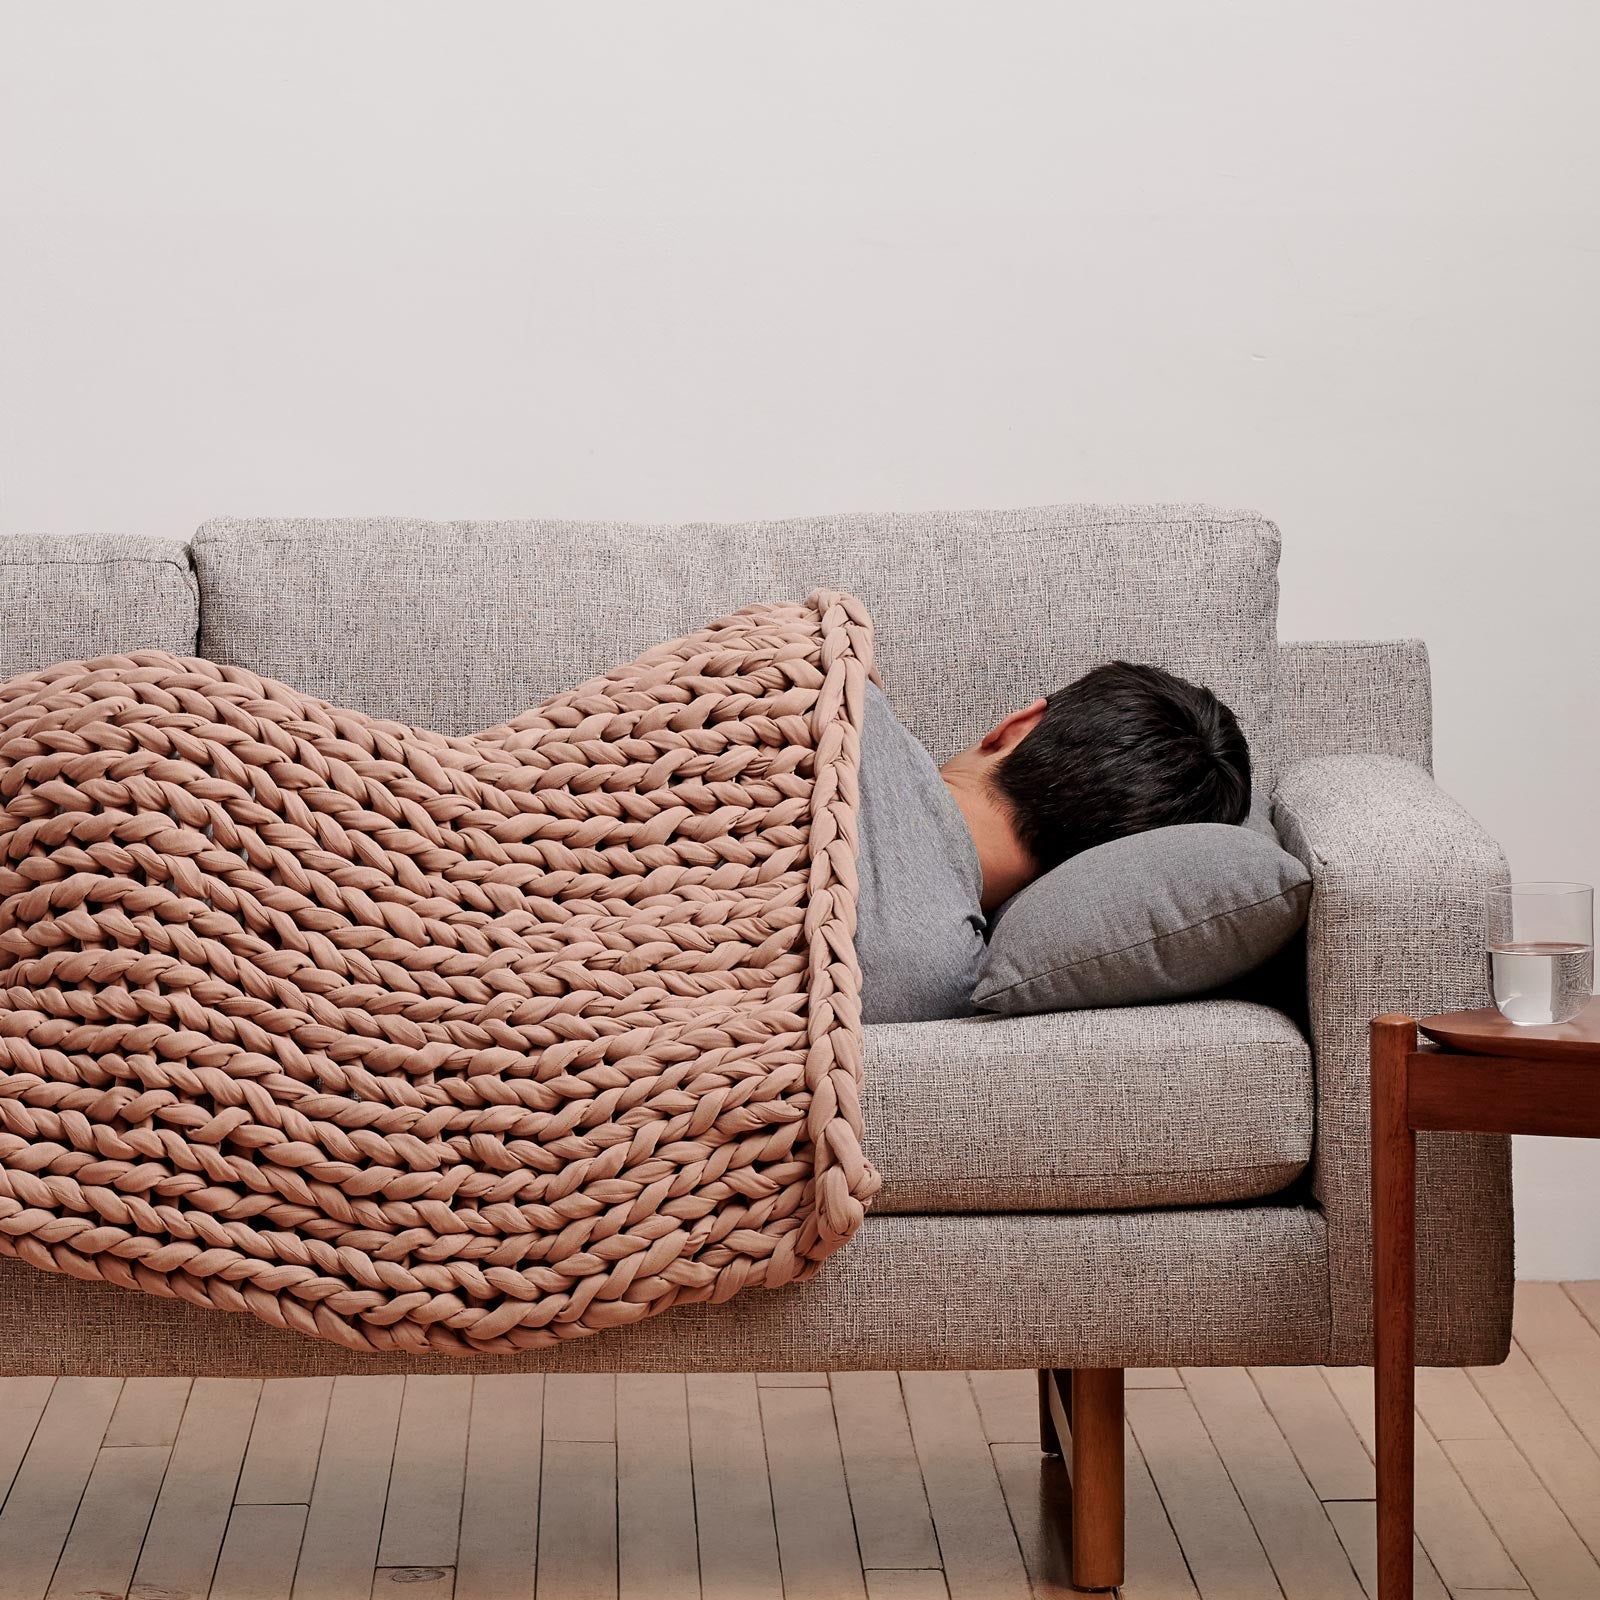 weighted blanket for pain relief